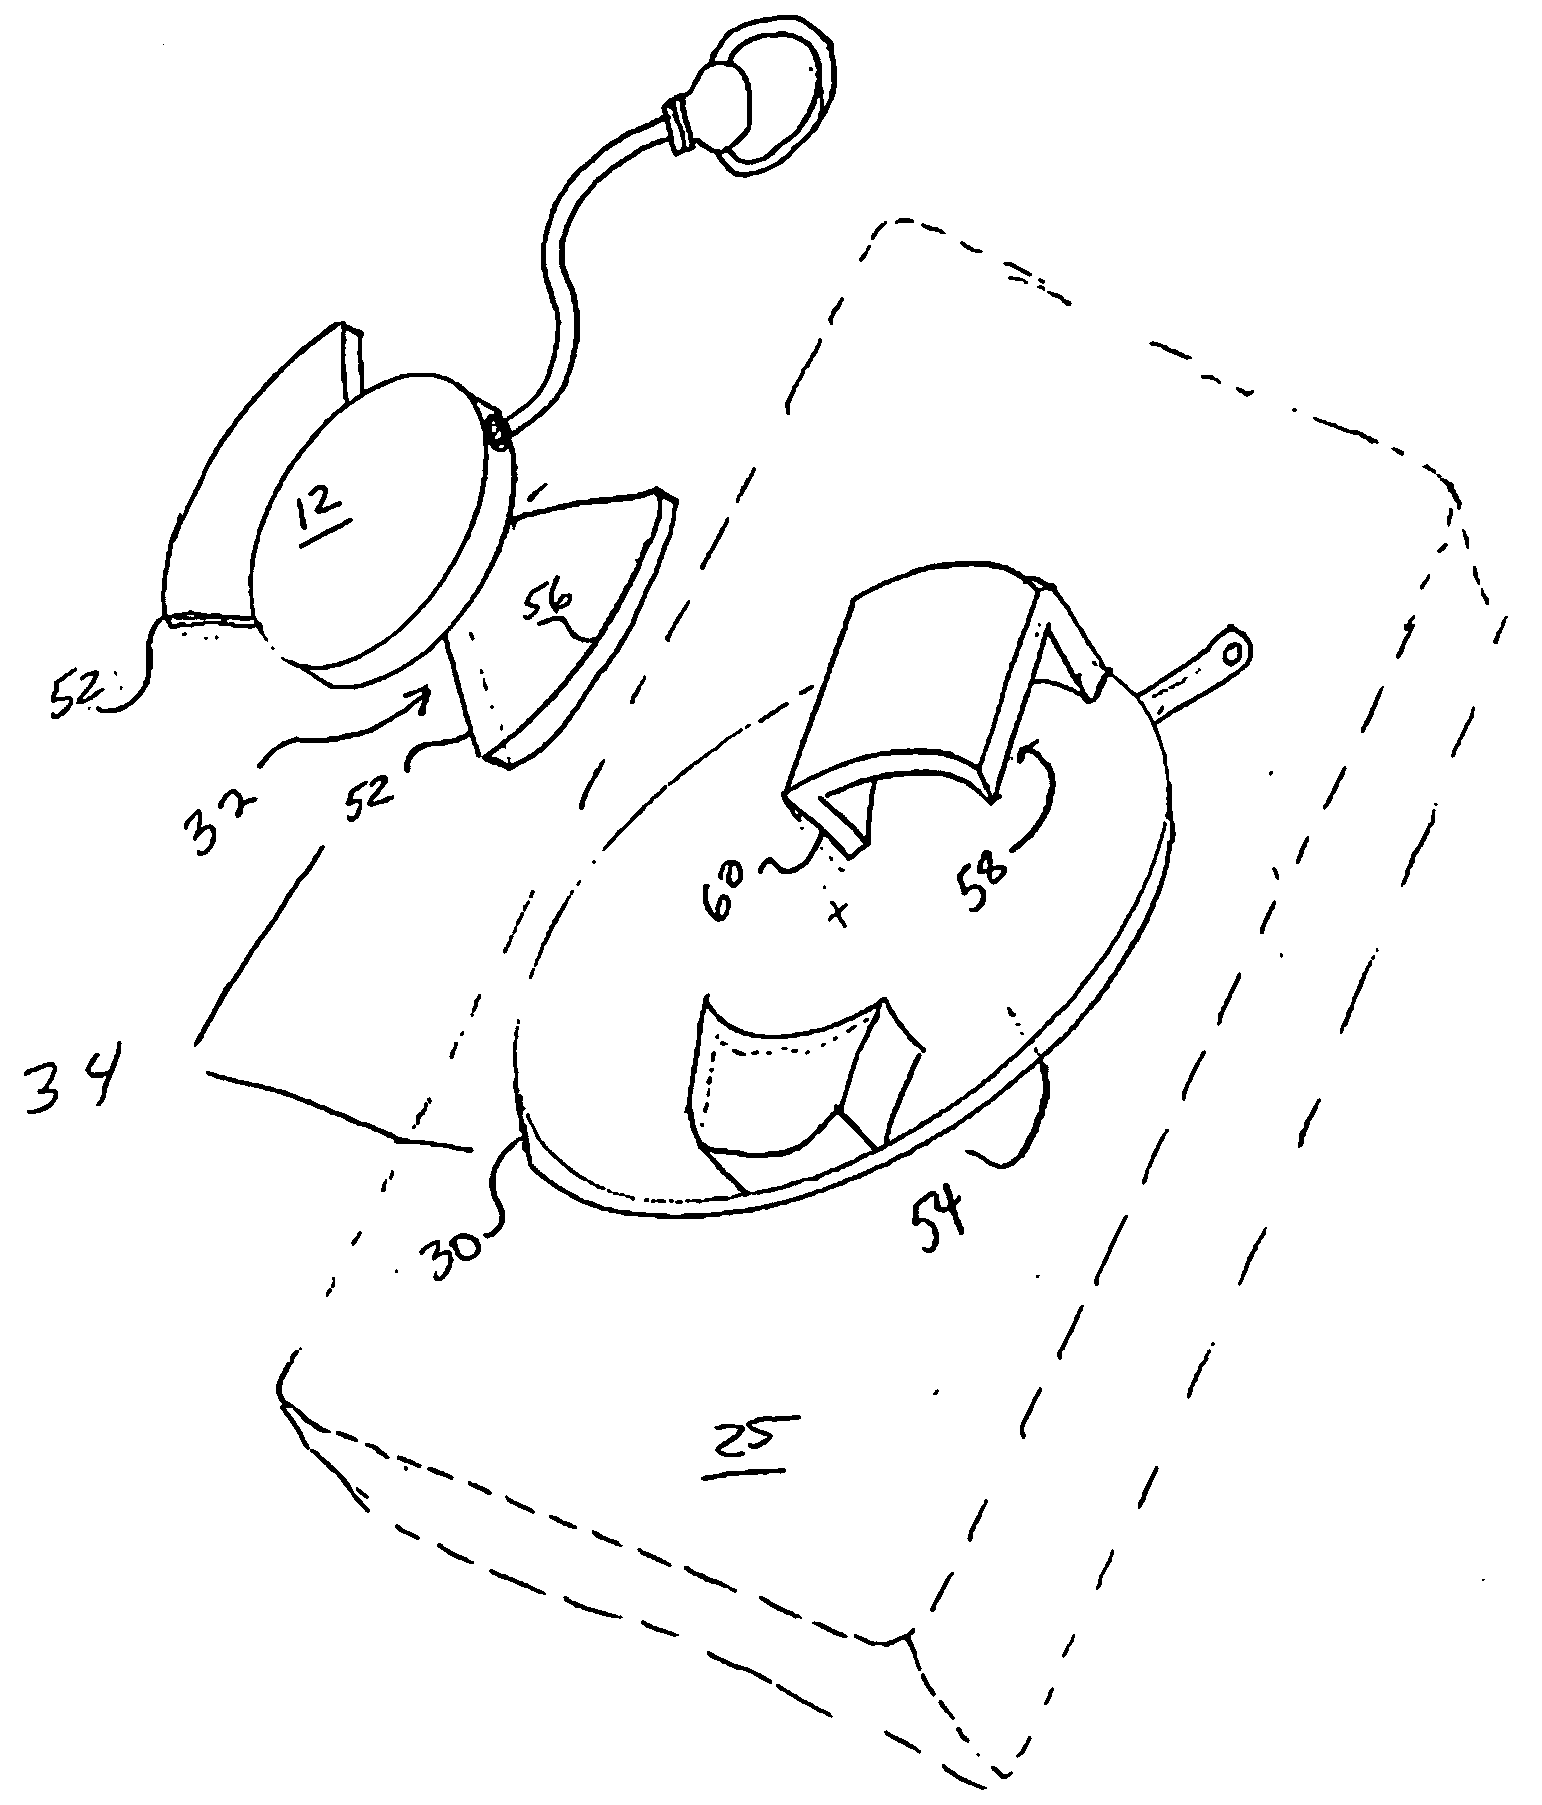 Retractable cord assembly for securing portable electronic devices